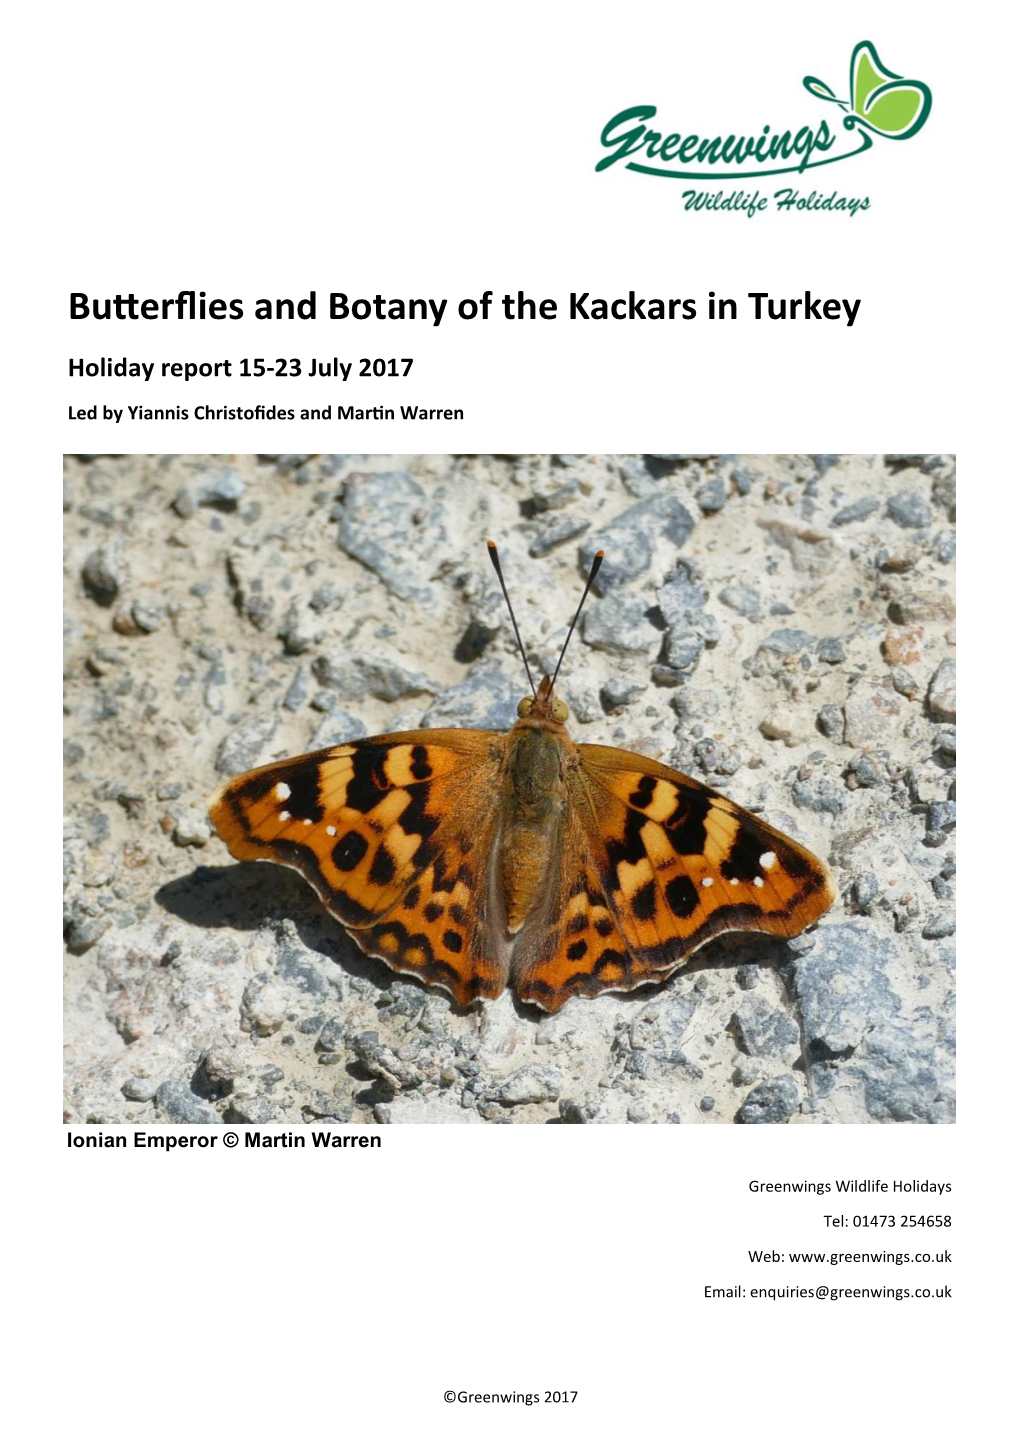 Butterflies and Botany of the Kackars in Turkey Holiday Report 15-23 July 2017